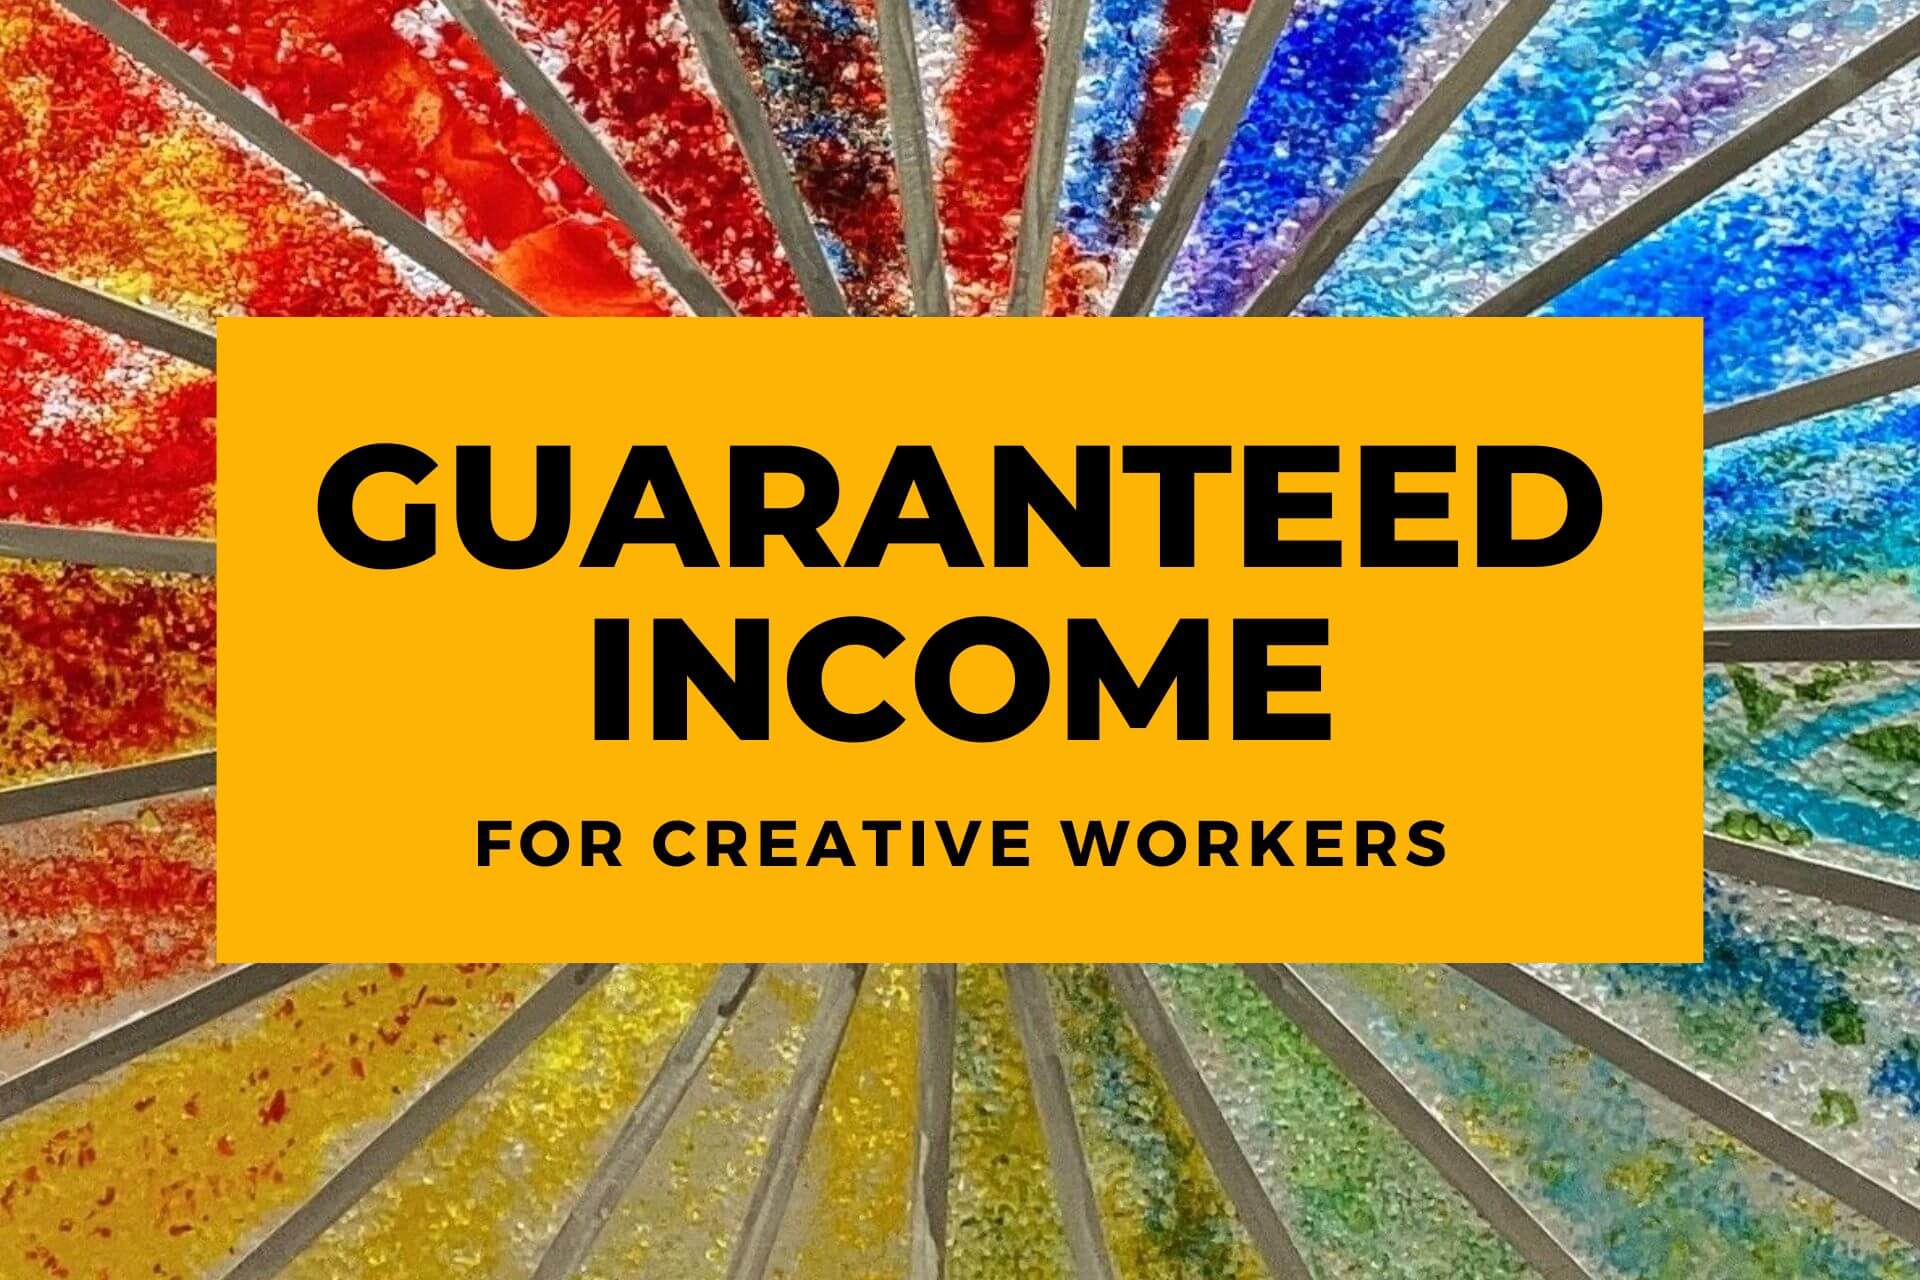 Nonprofit Supports the Careers of Artists and Creative Workers With Guaranteed Income